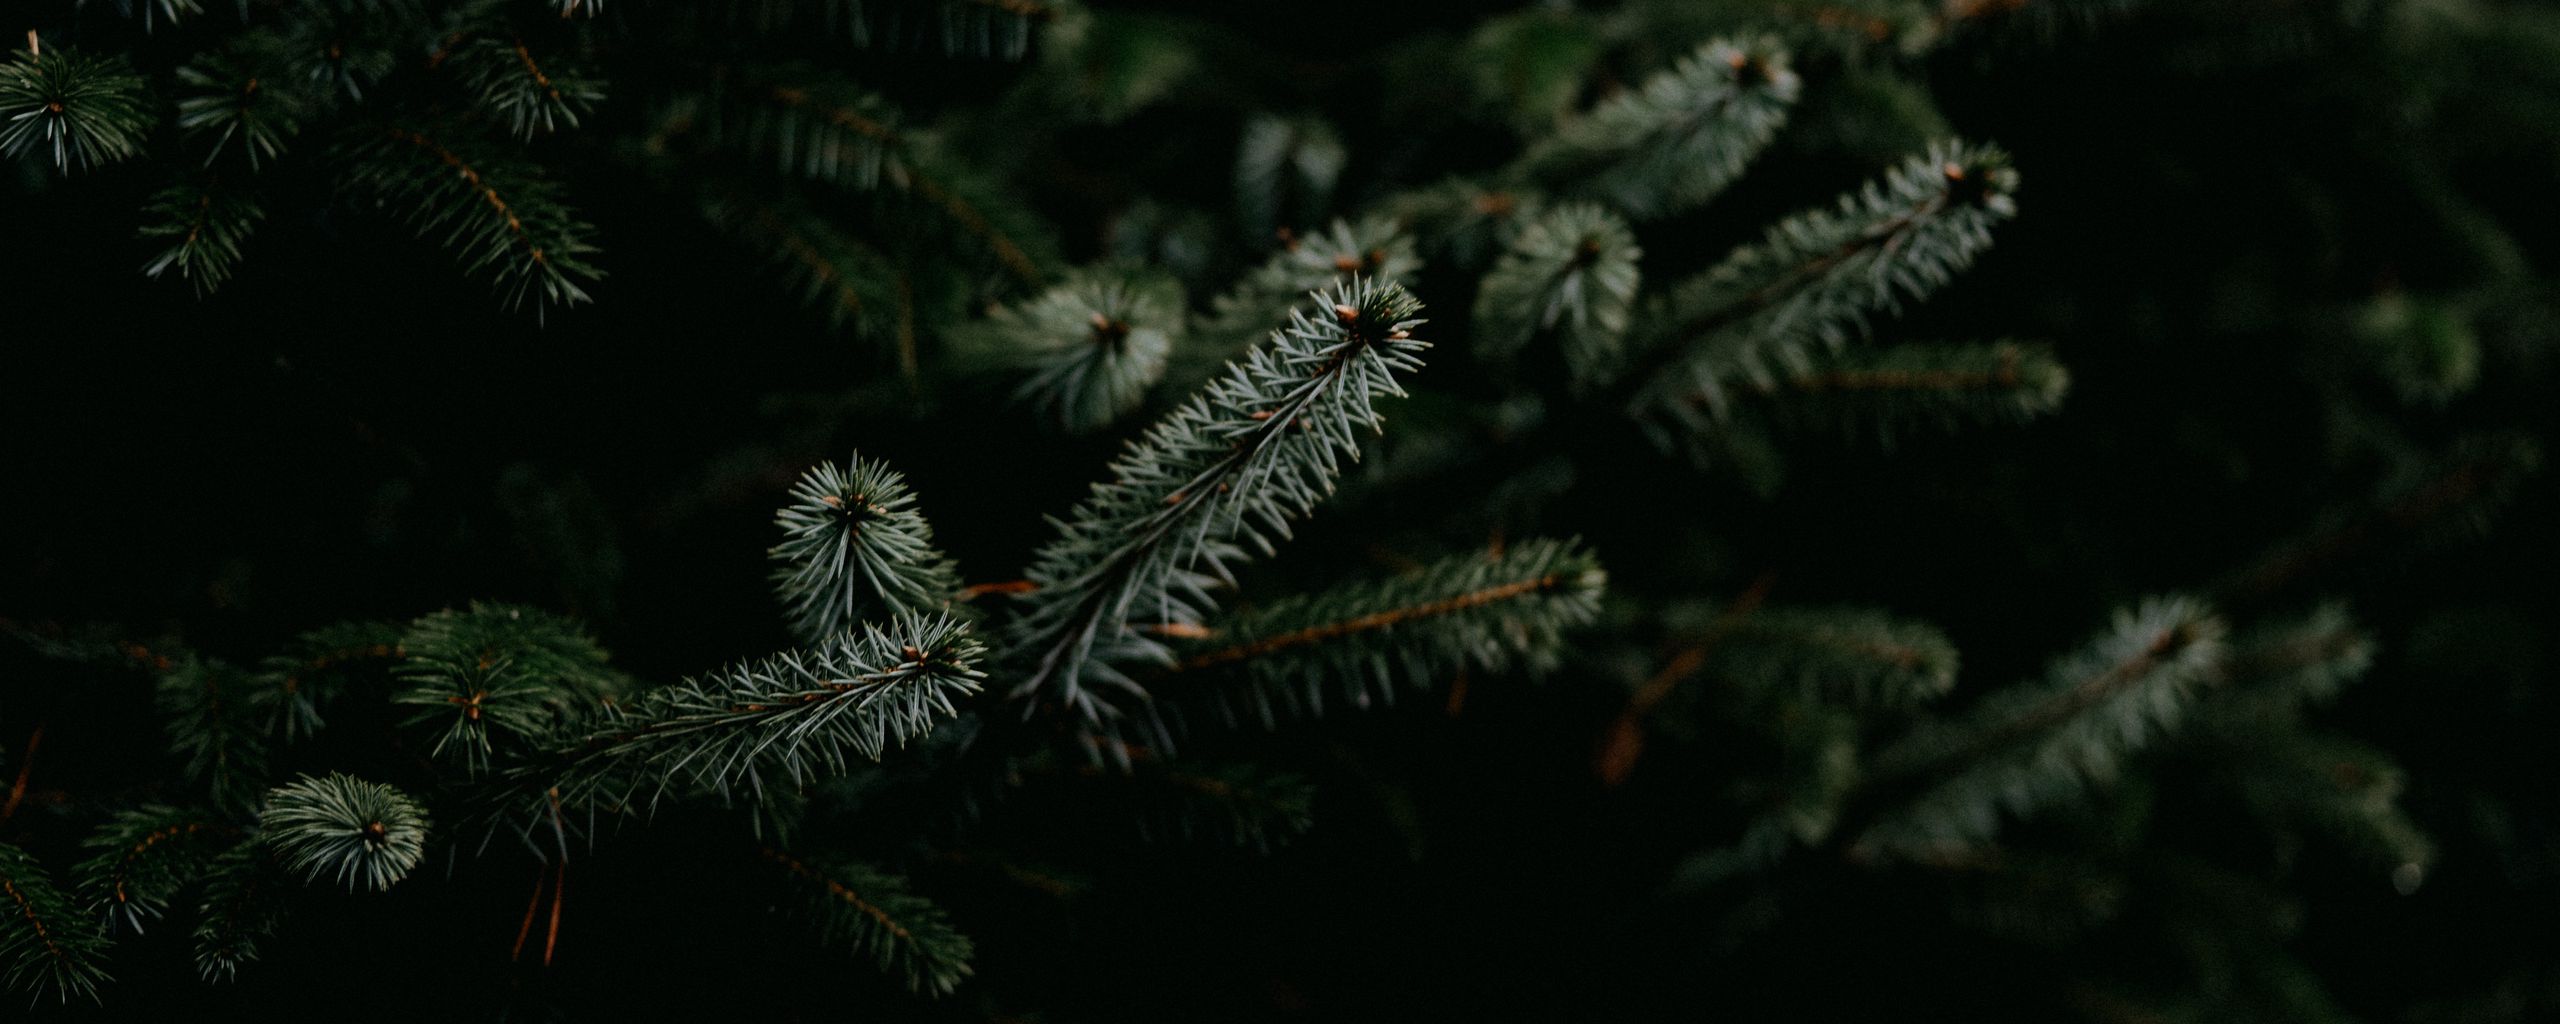 Download wallpaper 2560x1024 pine, branches, needles, plant, green